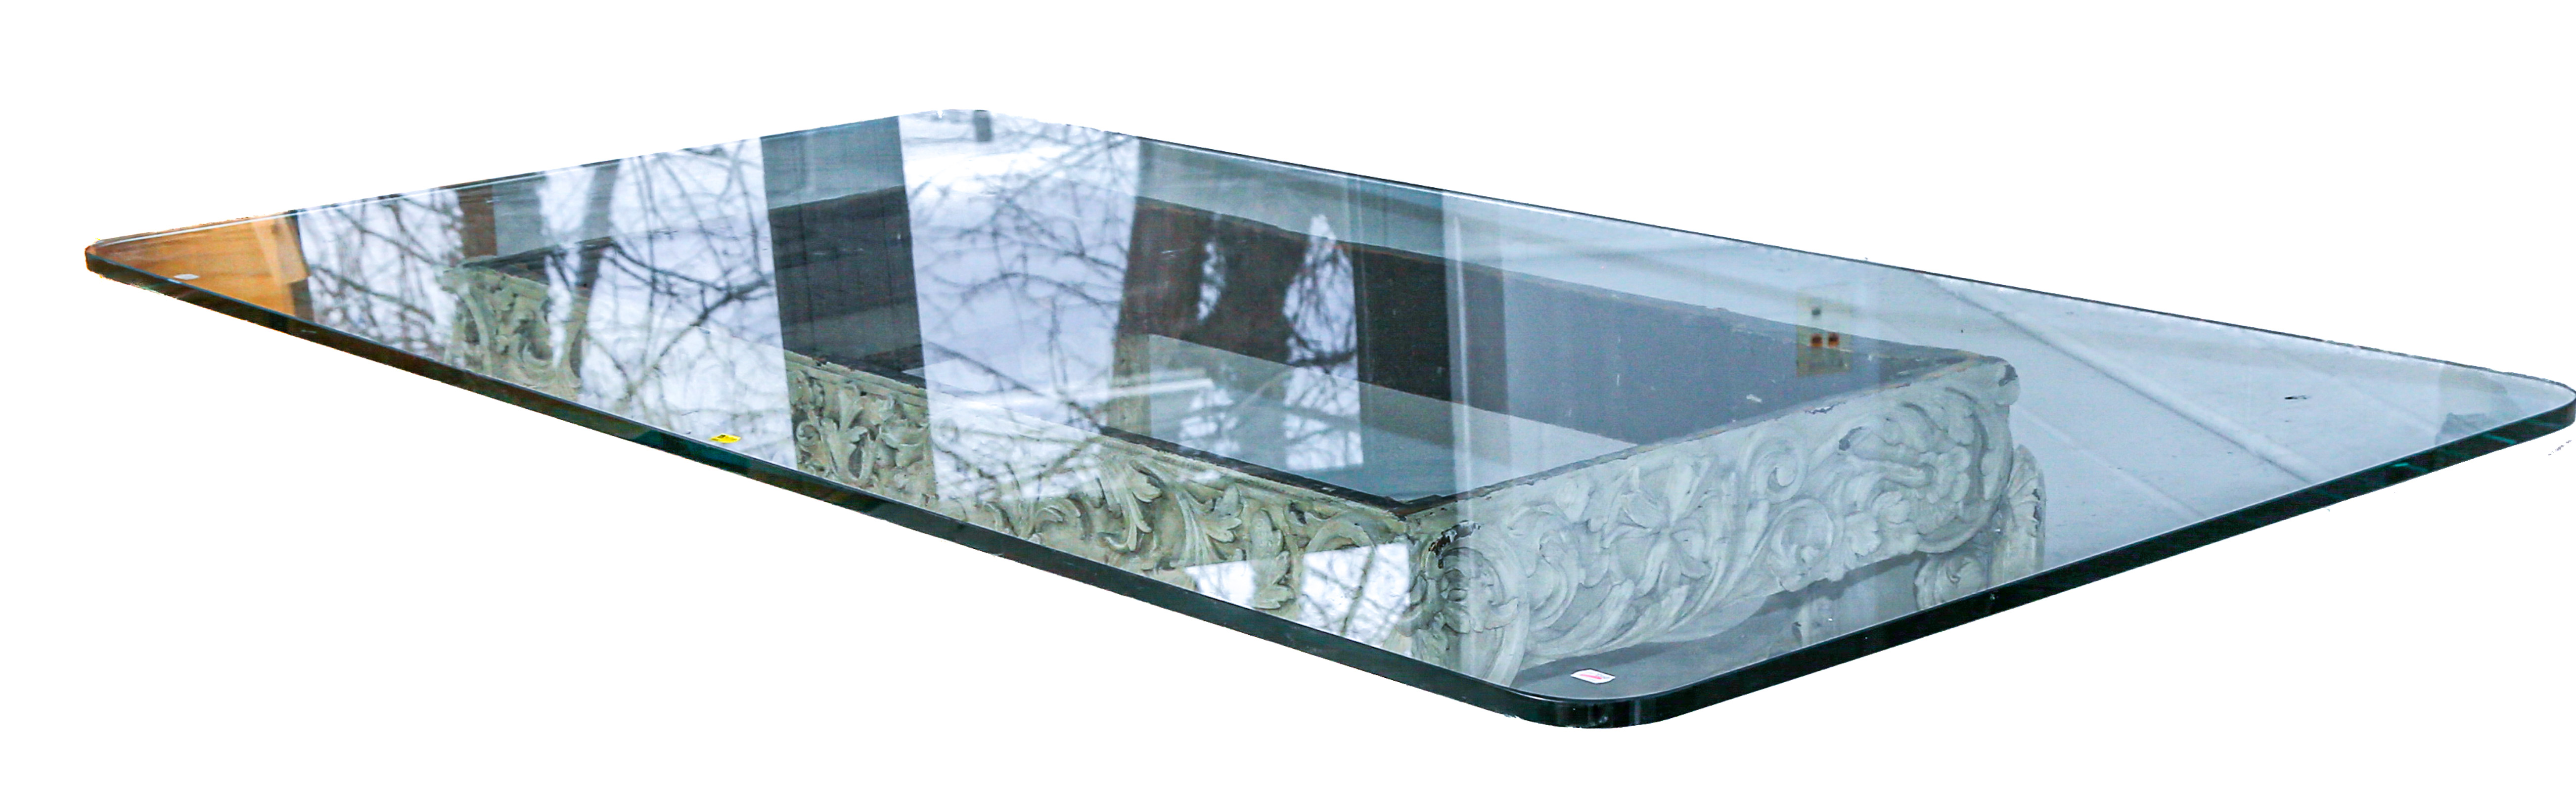 LARGE GLASS TABLETOP .